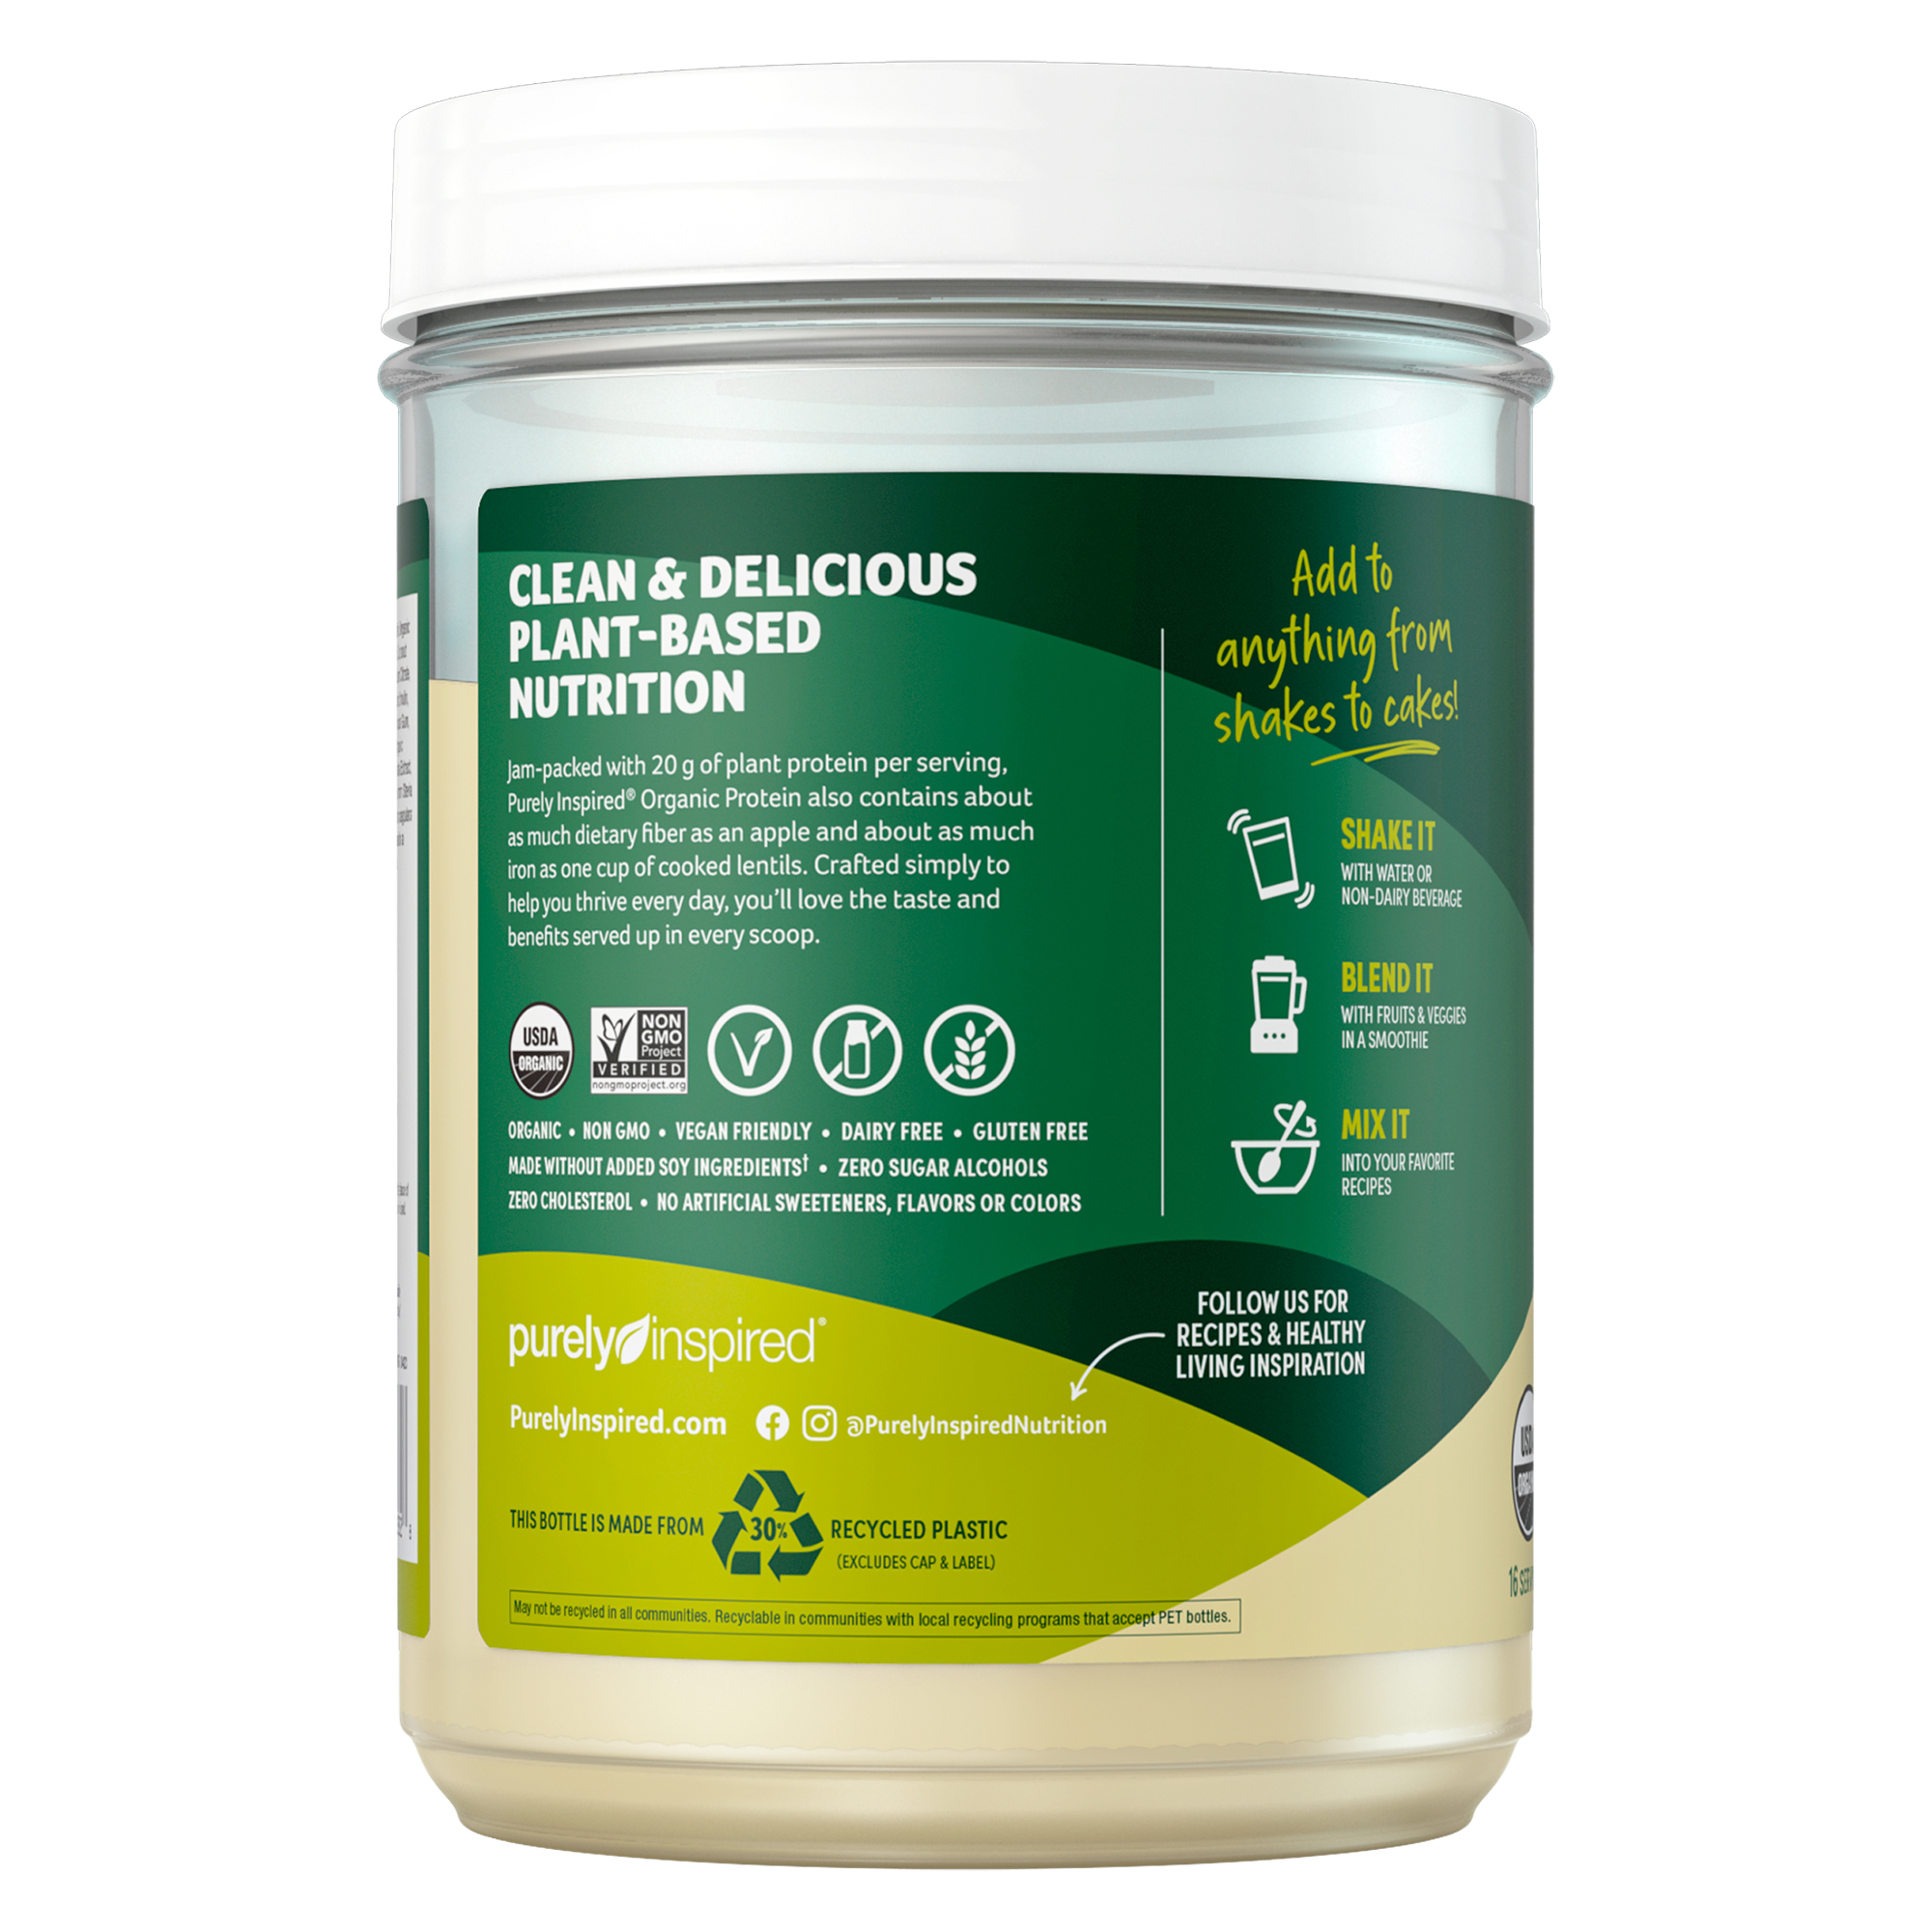 Purely Inspired Organic Plant-Based Protein Powder, Vanilla, 20g Protein, 1.25 lbs, 16 Servings - image 2 of 10